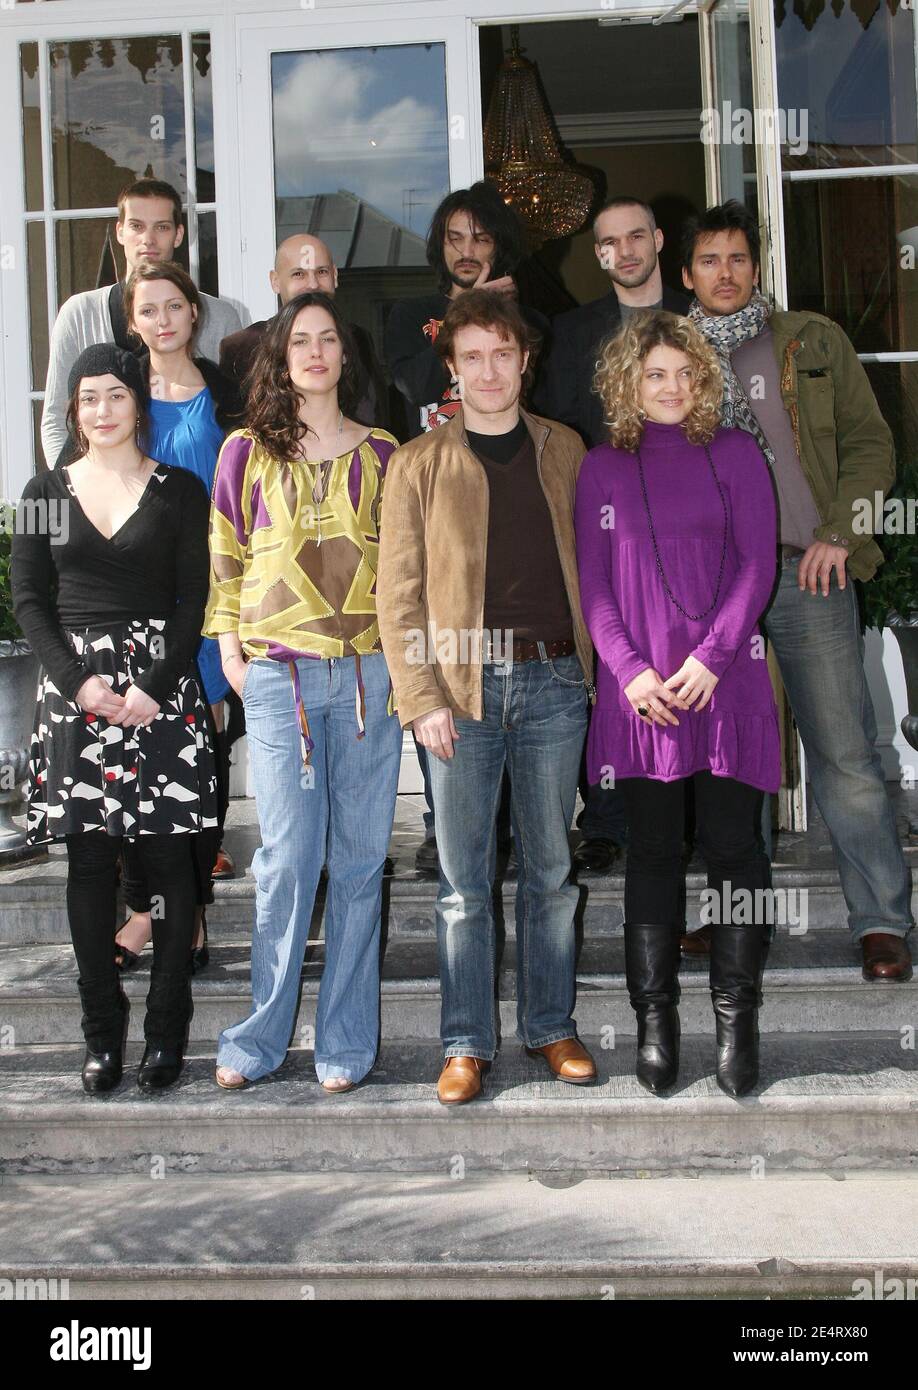 Jury's members from short movie (L to R) Fanny Valette, Julie Fournier, Stephanie Crayencour, Andy Gillet, Sylvain Goldberg, Vincent Martinez, Philippe Bas and Alexandre Thibault pose for pictures during the 19th Valenciennes film festival in Valenciennes, France on March 29, 2008. Photo by Denis Guignebourg/ABACAPRESS.COM Stock Photo